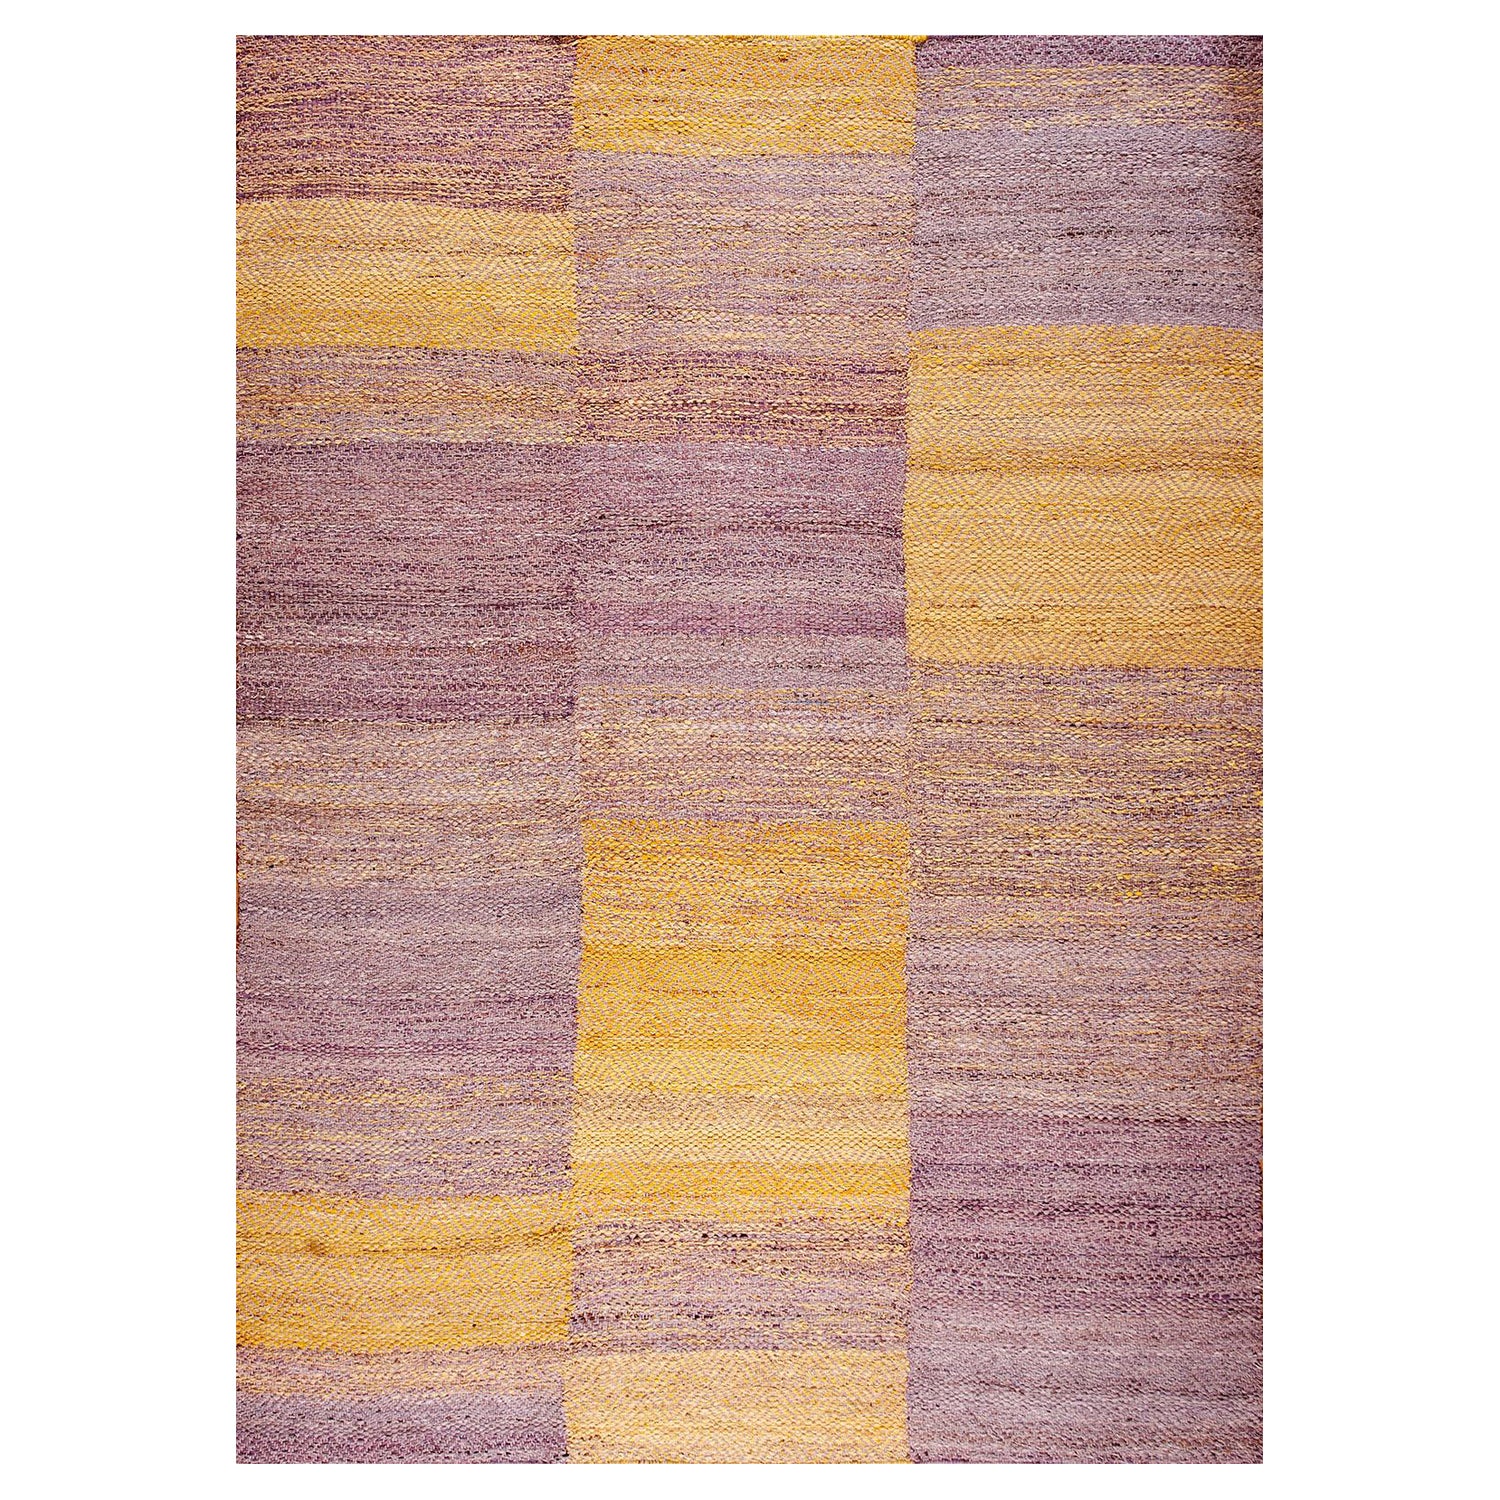 Contemporary Handwoven Wool Shaker Style Flat Weave Carpet (8'9"x12' - 267x366) For Sale